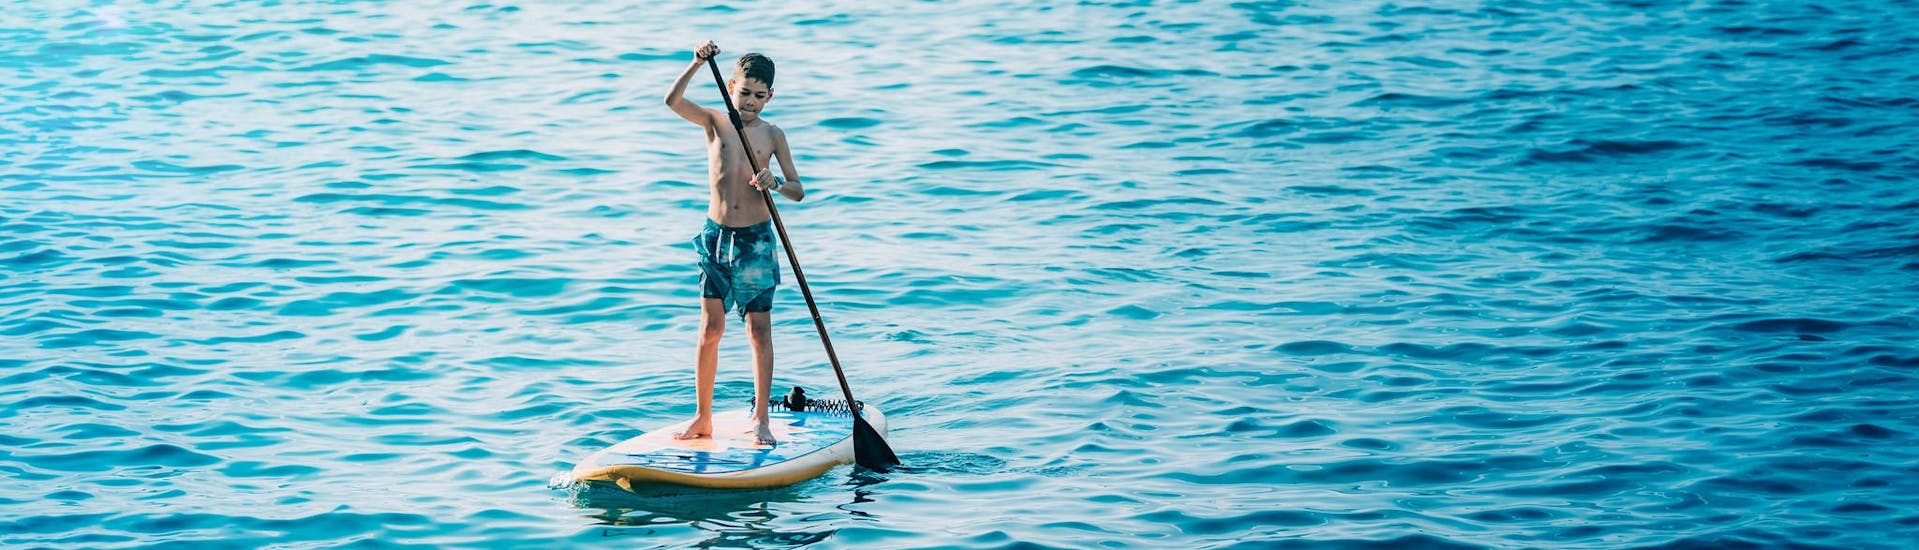 A kid on a board during a boat rental activity with SUP boards included on board.